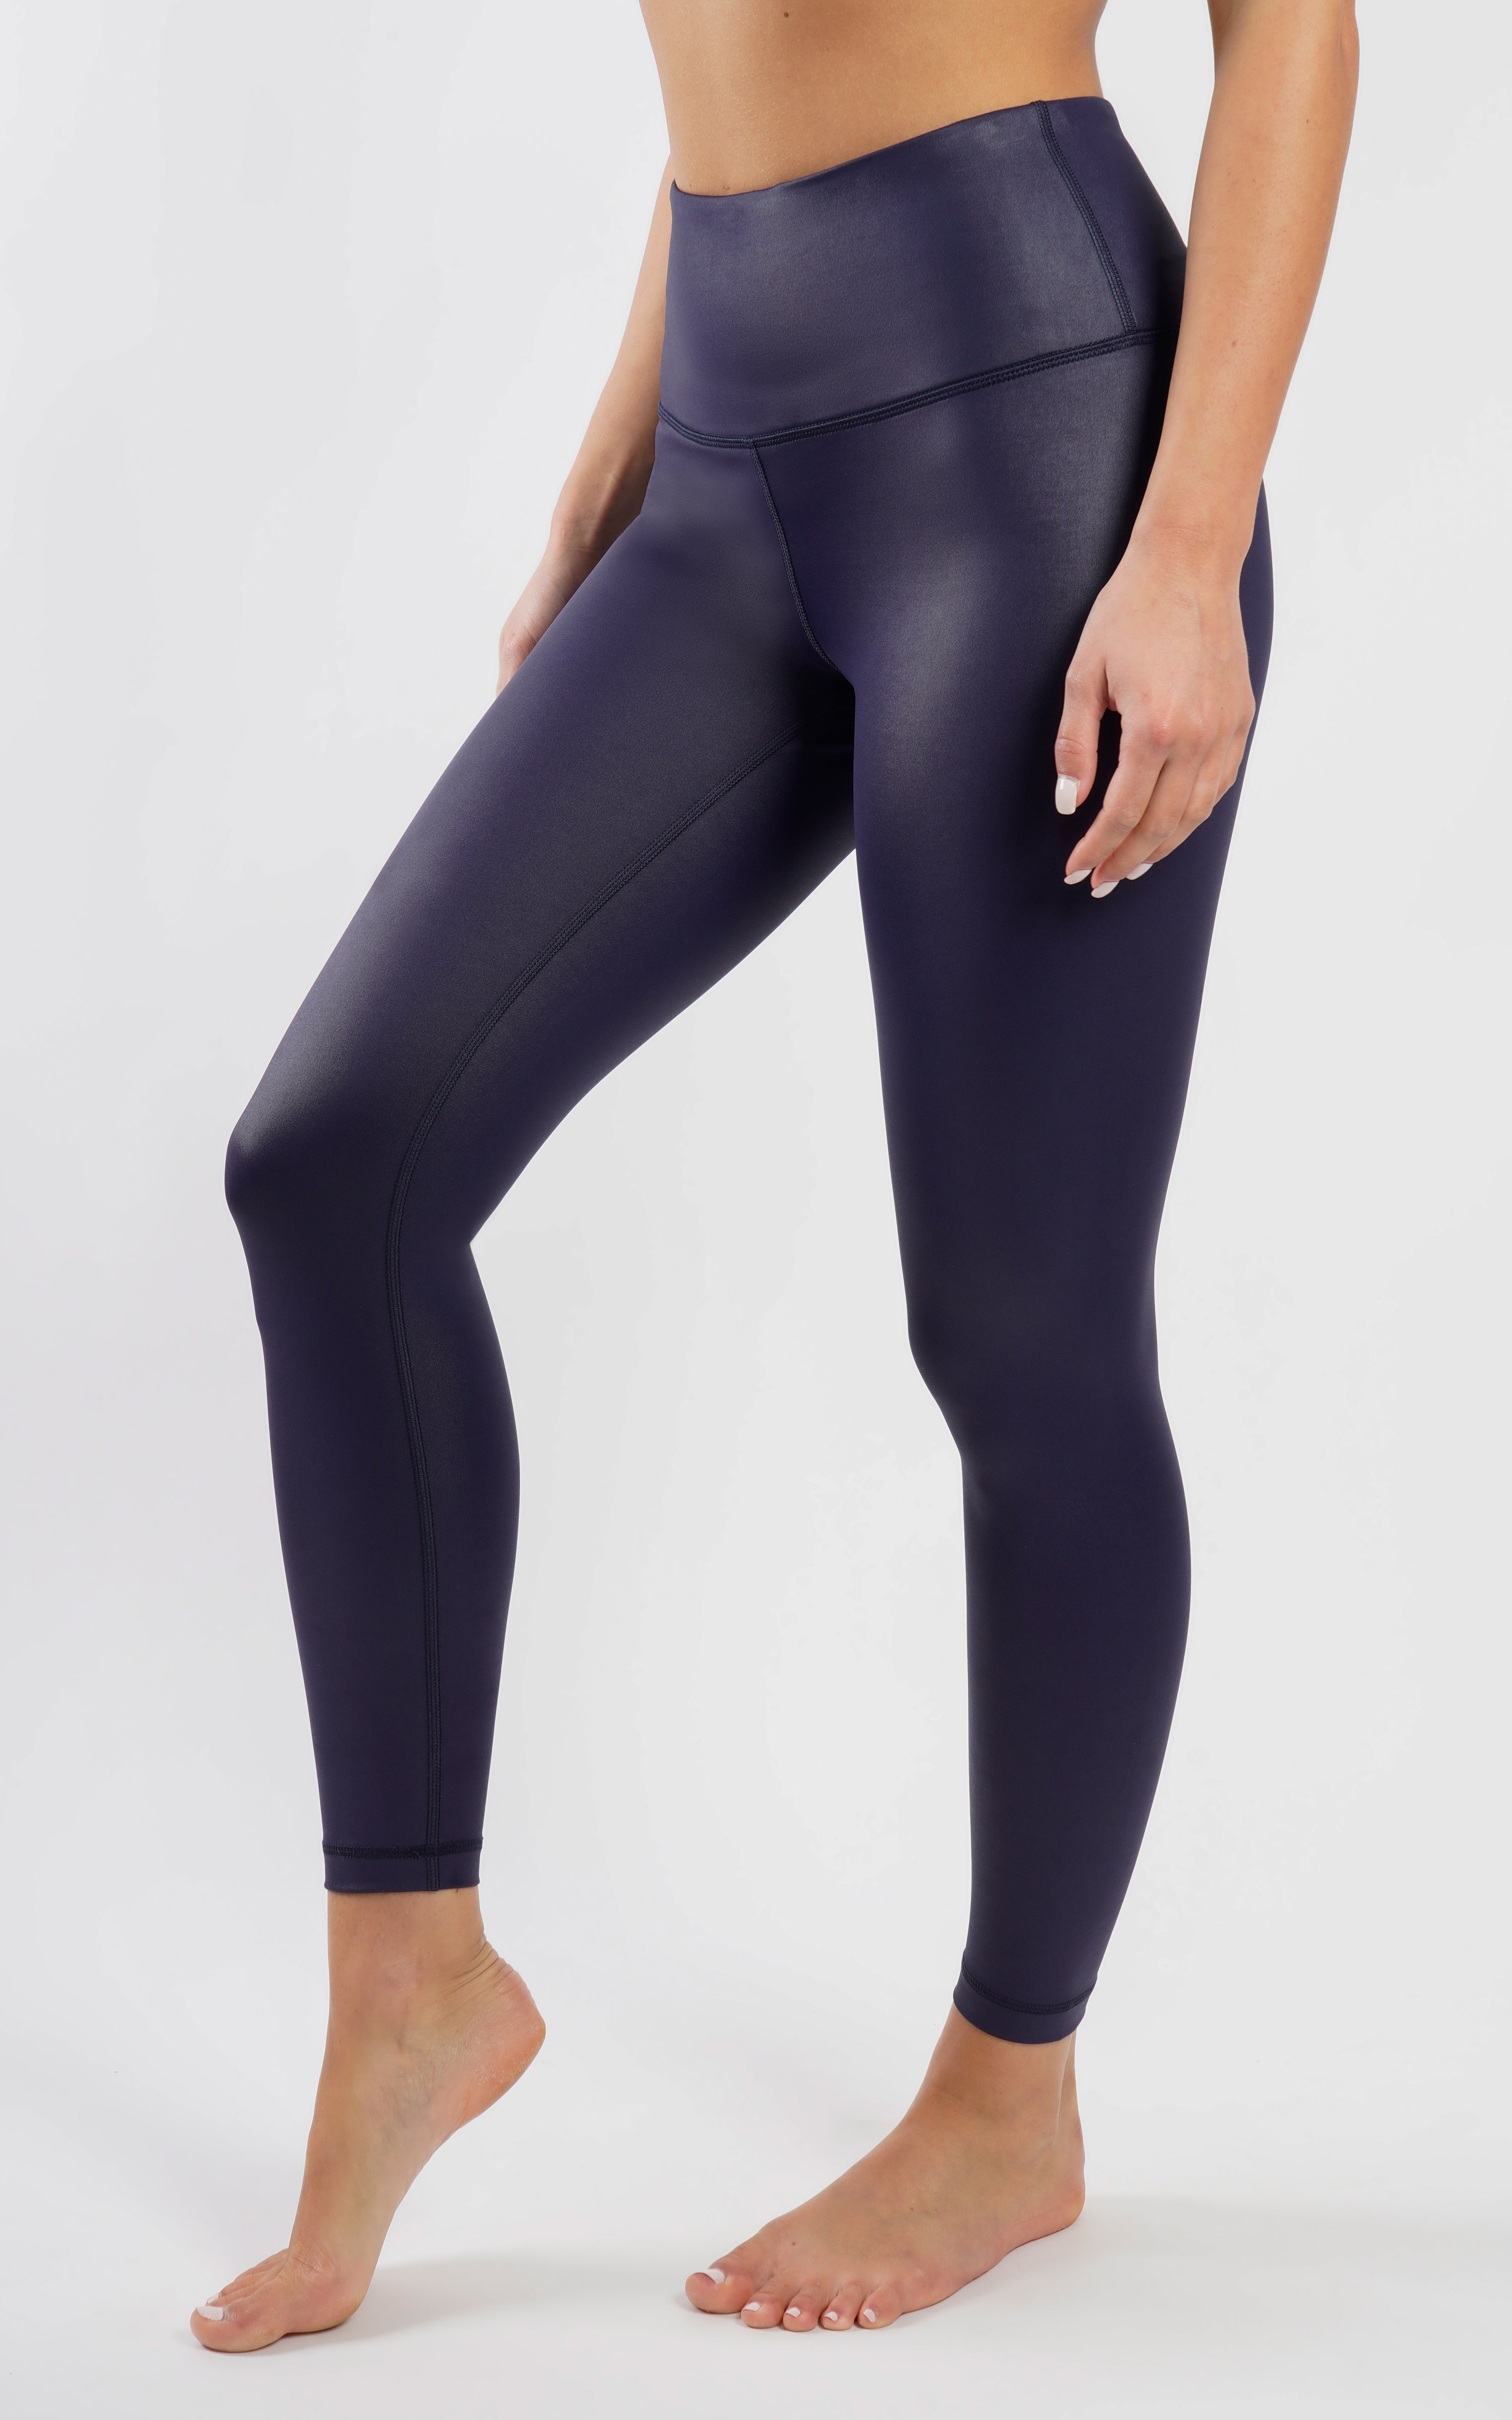 You Chill Shine High-Waisted Leggings